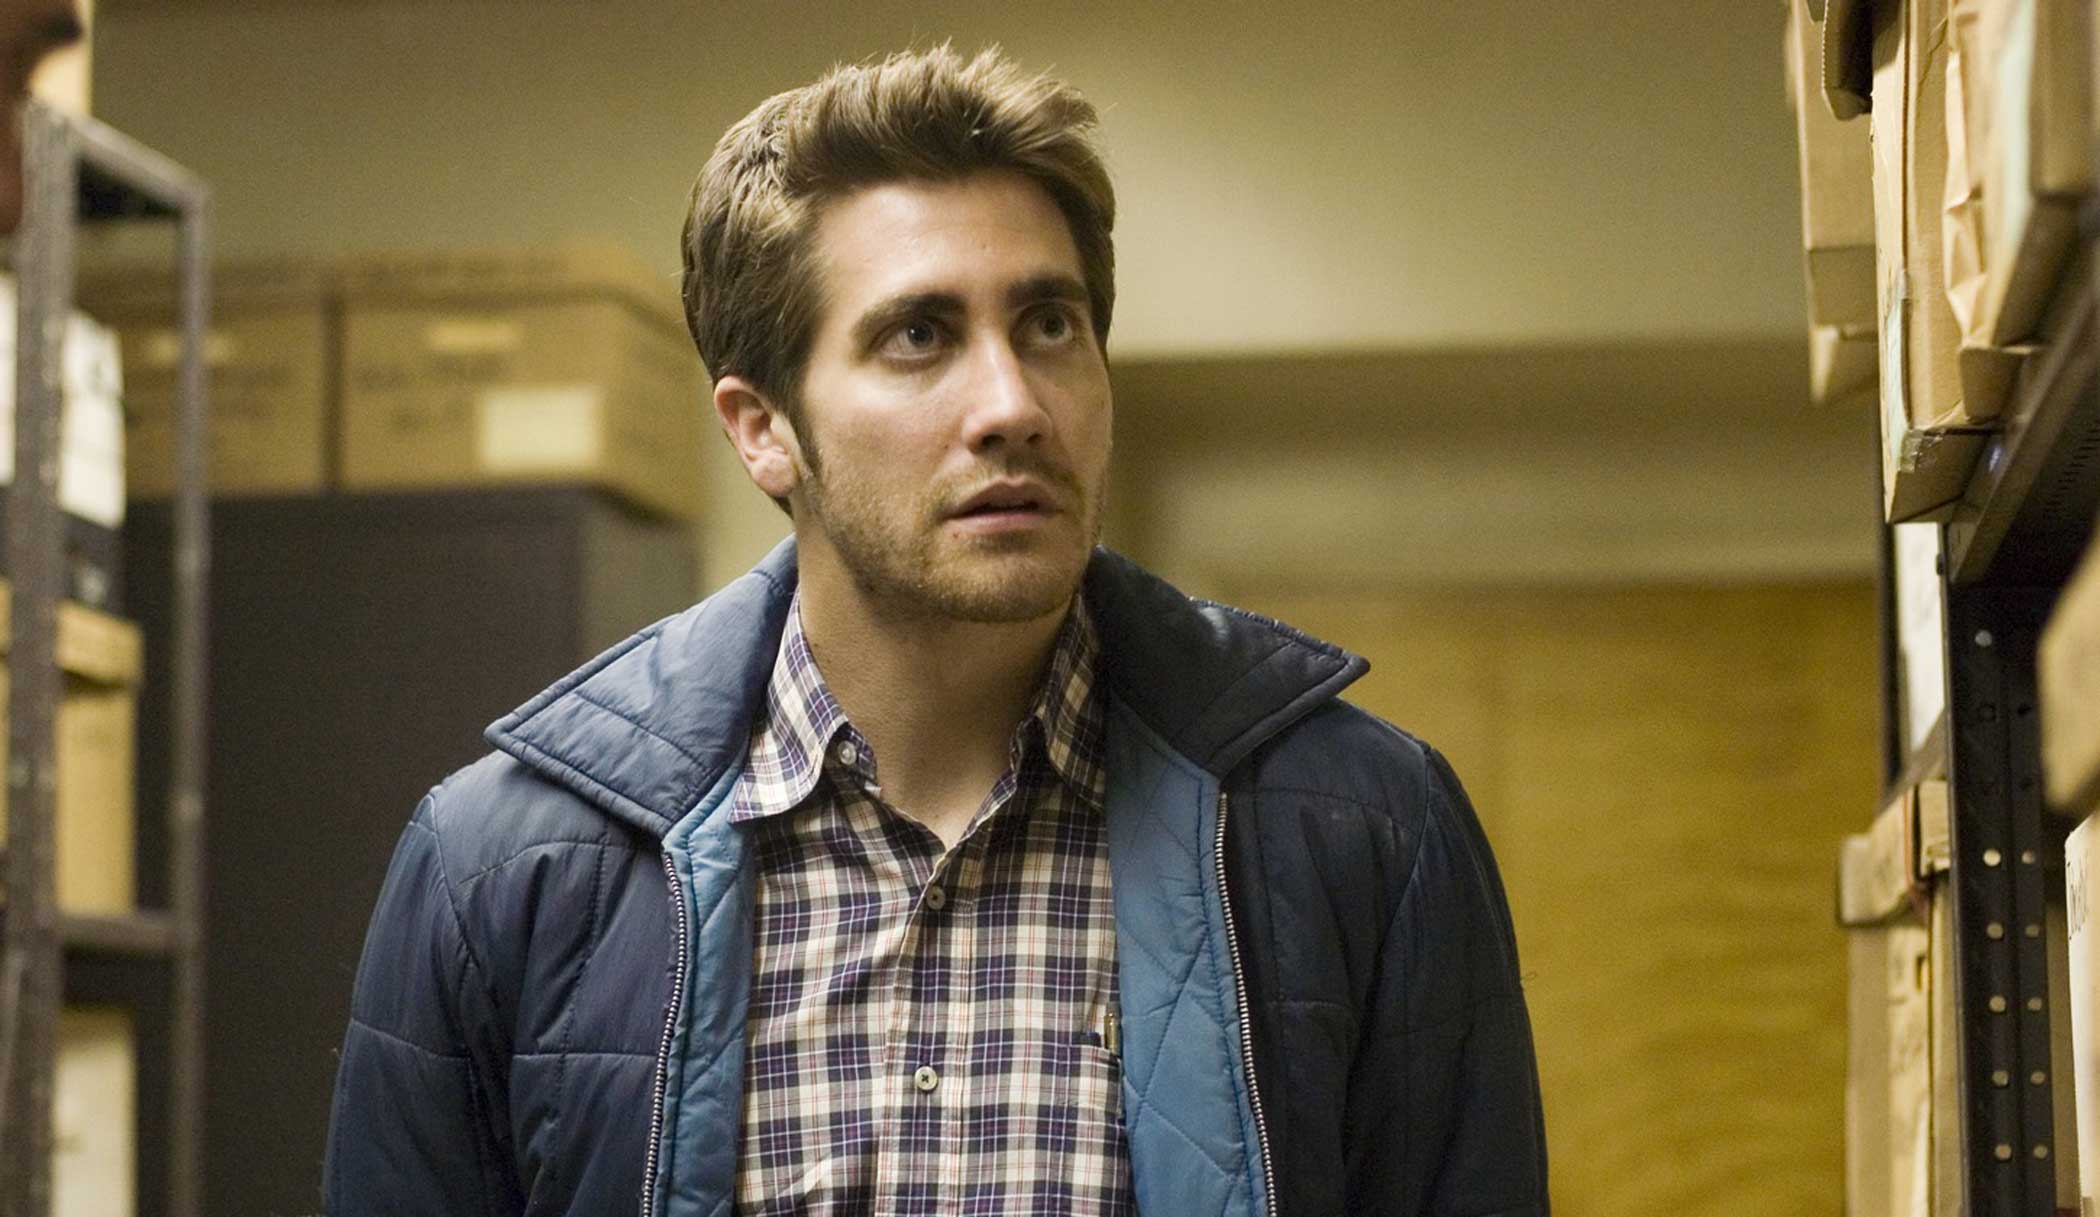 Zodiac, 2007 The David Fincher-directed film starring Jake Gyllenhaal is based on the real life events of the Zodiac Killer of the late 1960s in San Francisco. Gyllenhaal, who portrays Zodiac true crime author Robert Graysmith, met with Graysmith to prepare for his role. At least four men and three women were confirmed dead, with the killer getting his nickname from a symbol he'd include in cryptic letters to newspaper outlets. The case was never solved and remains open.